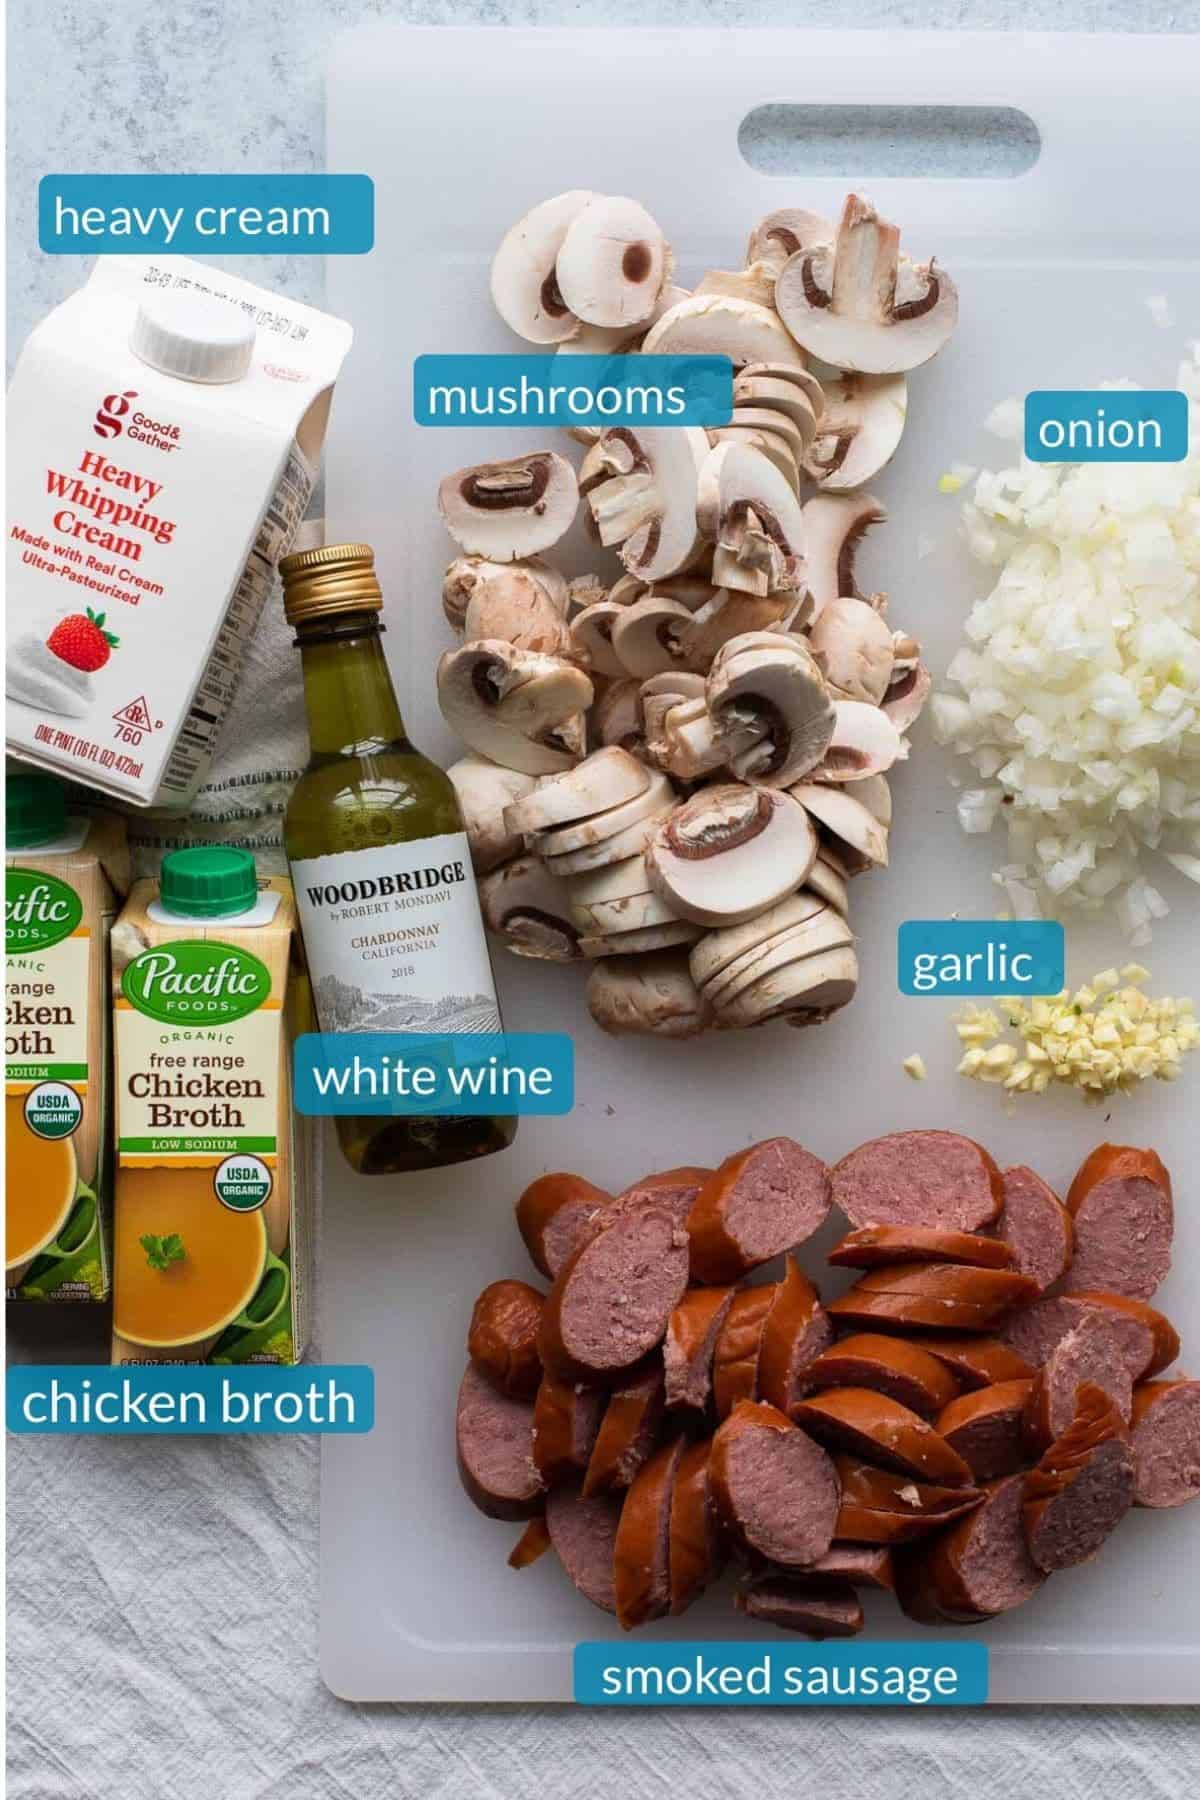 ingredients for recipe